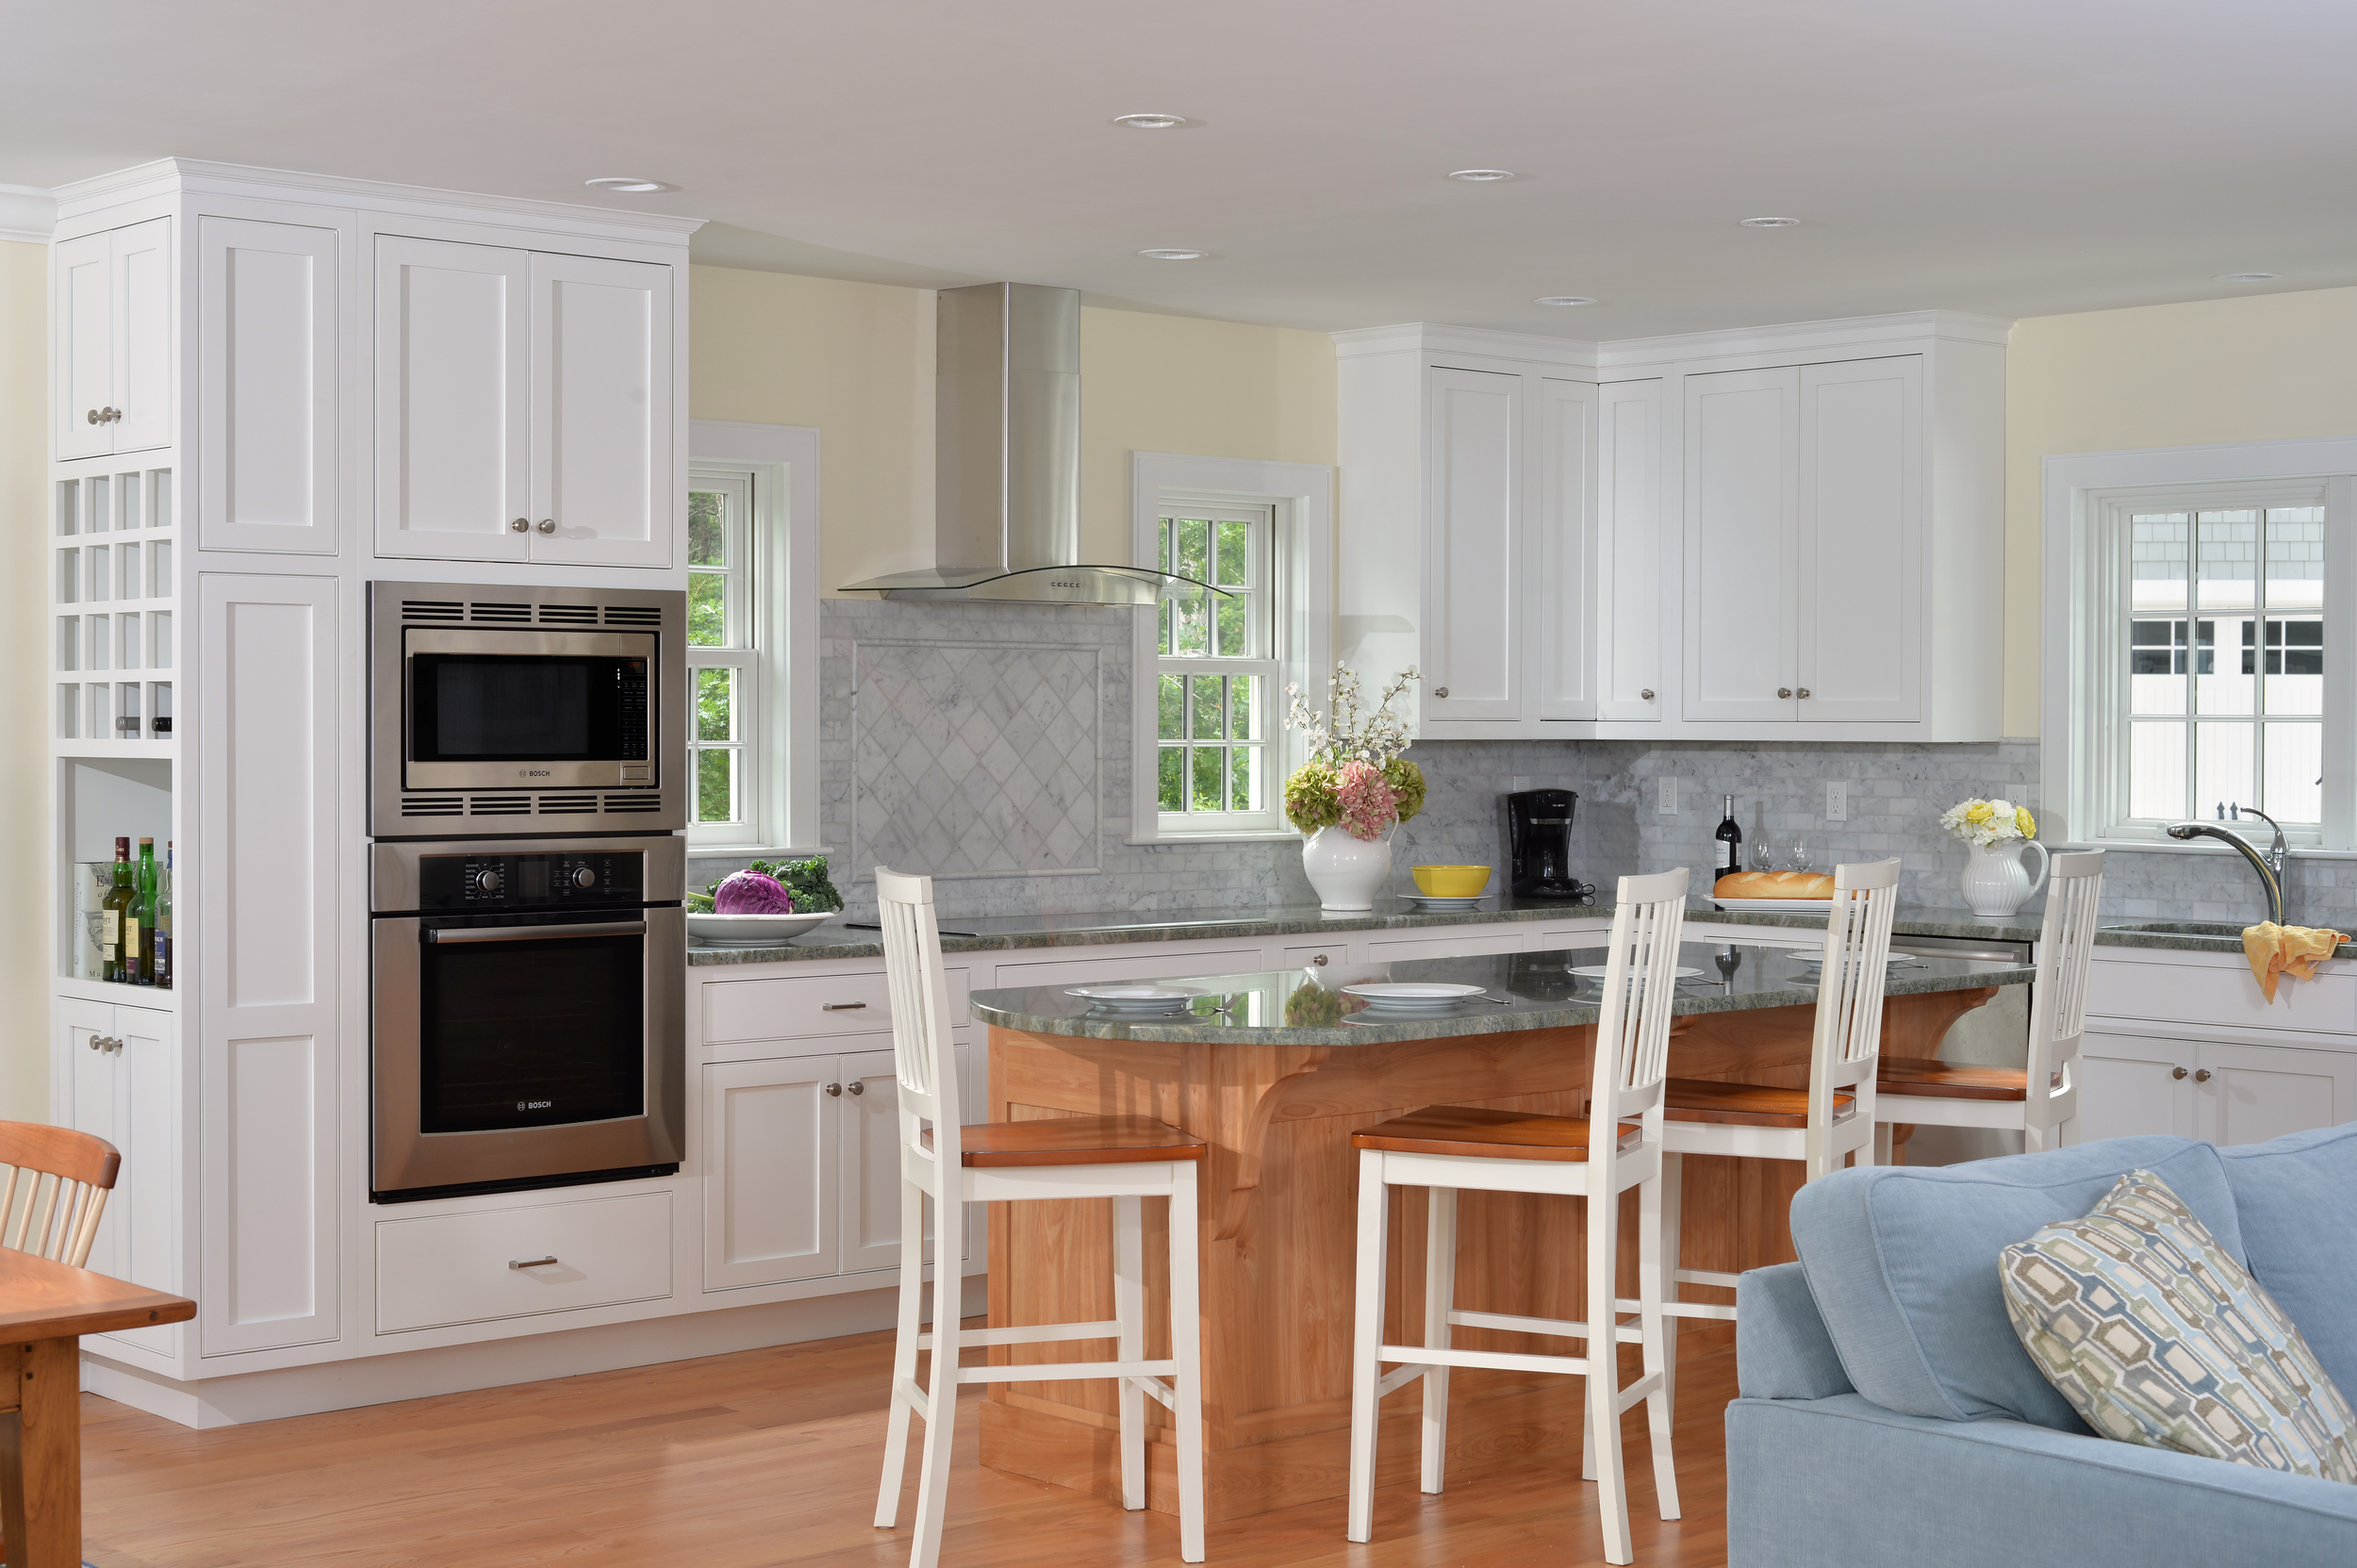 Kitchen cabinetry and kitchen design